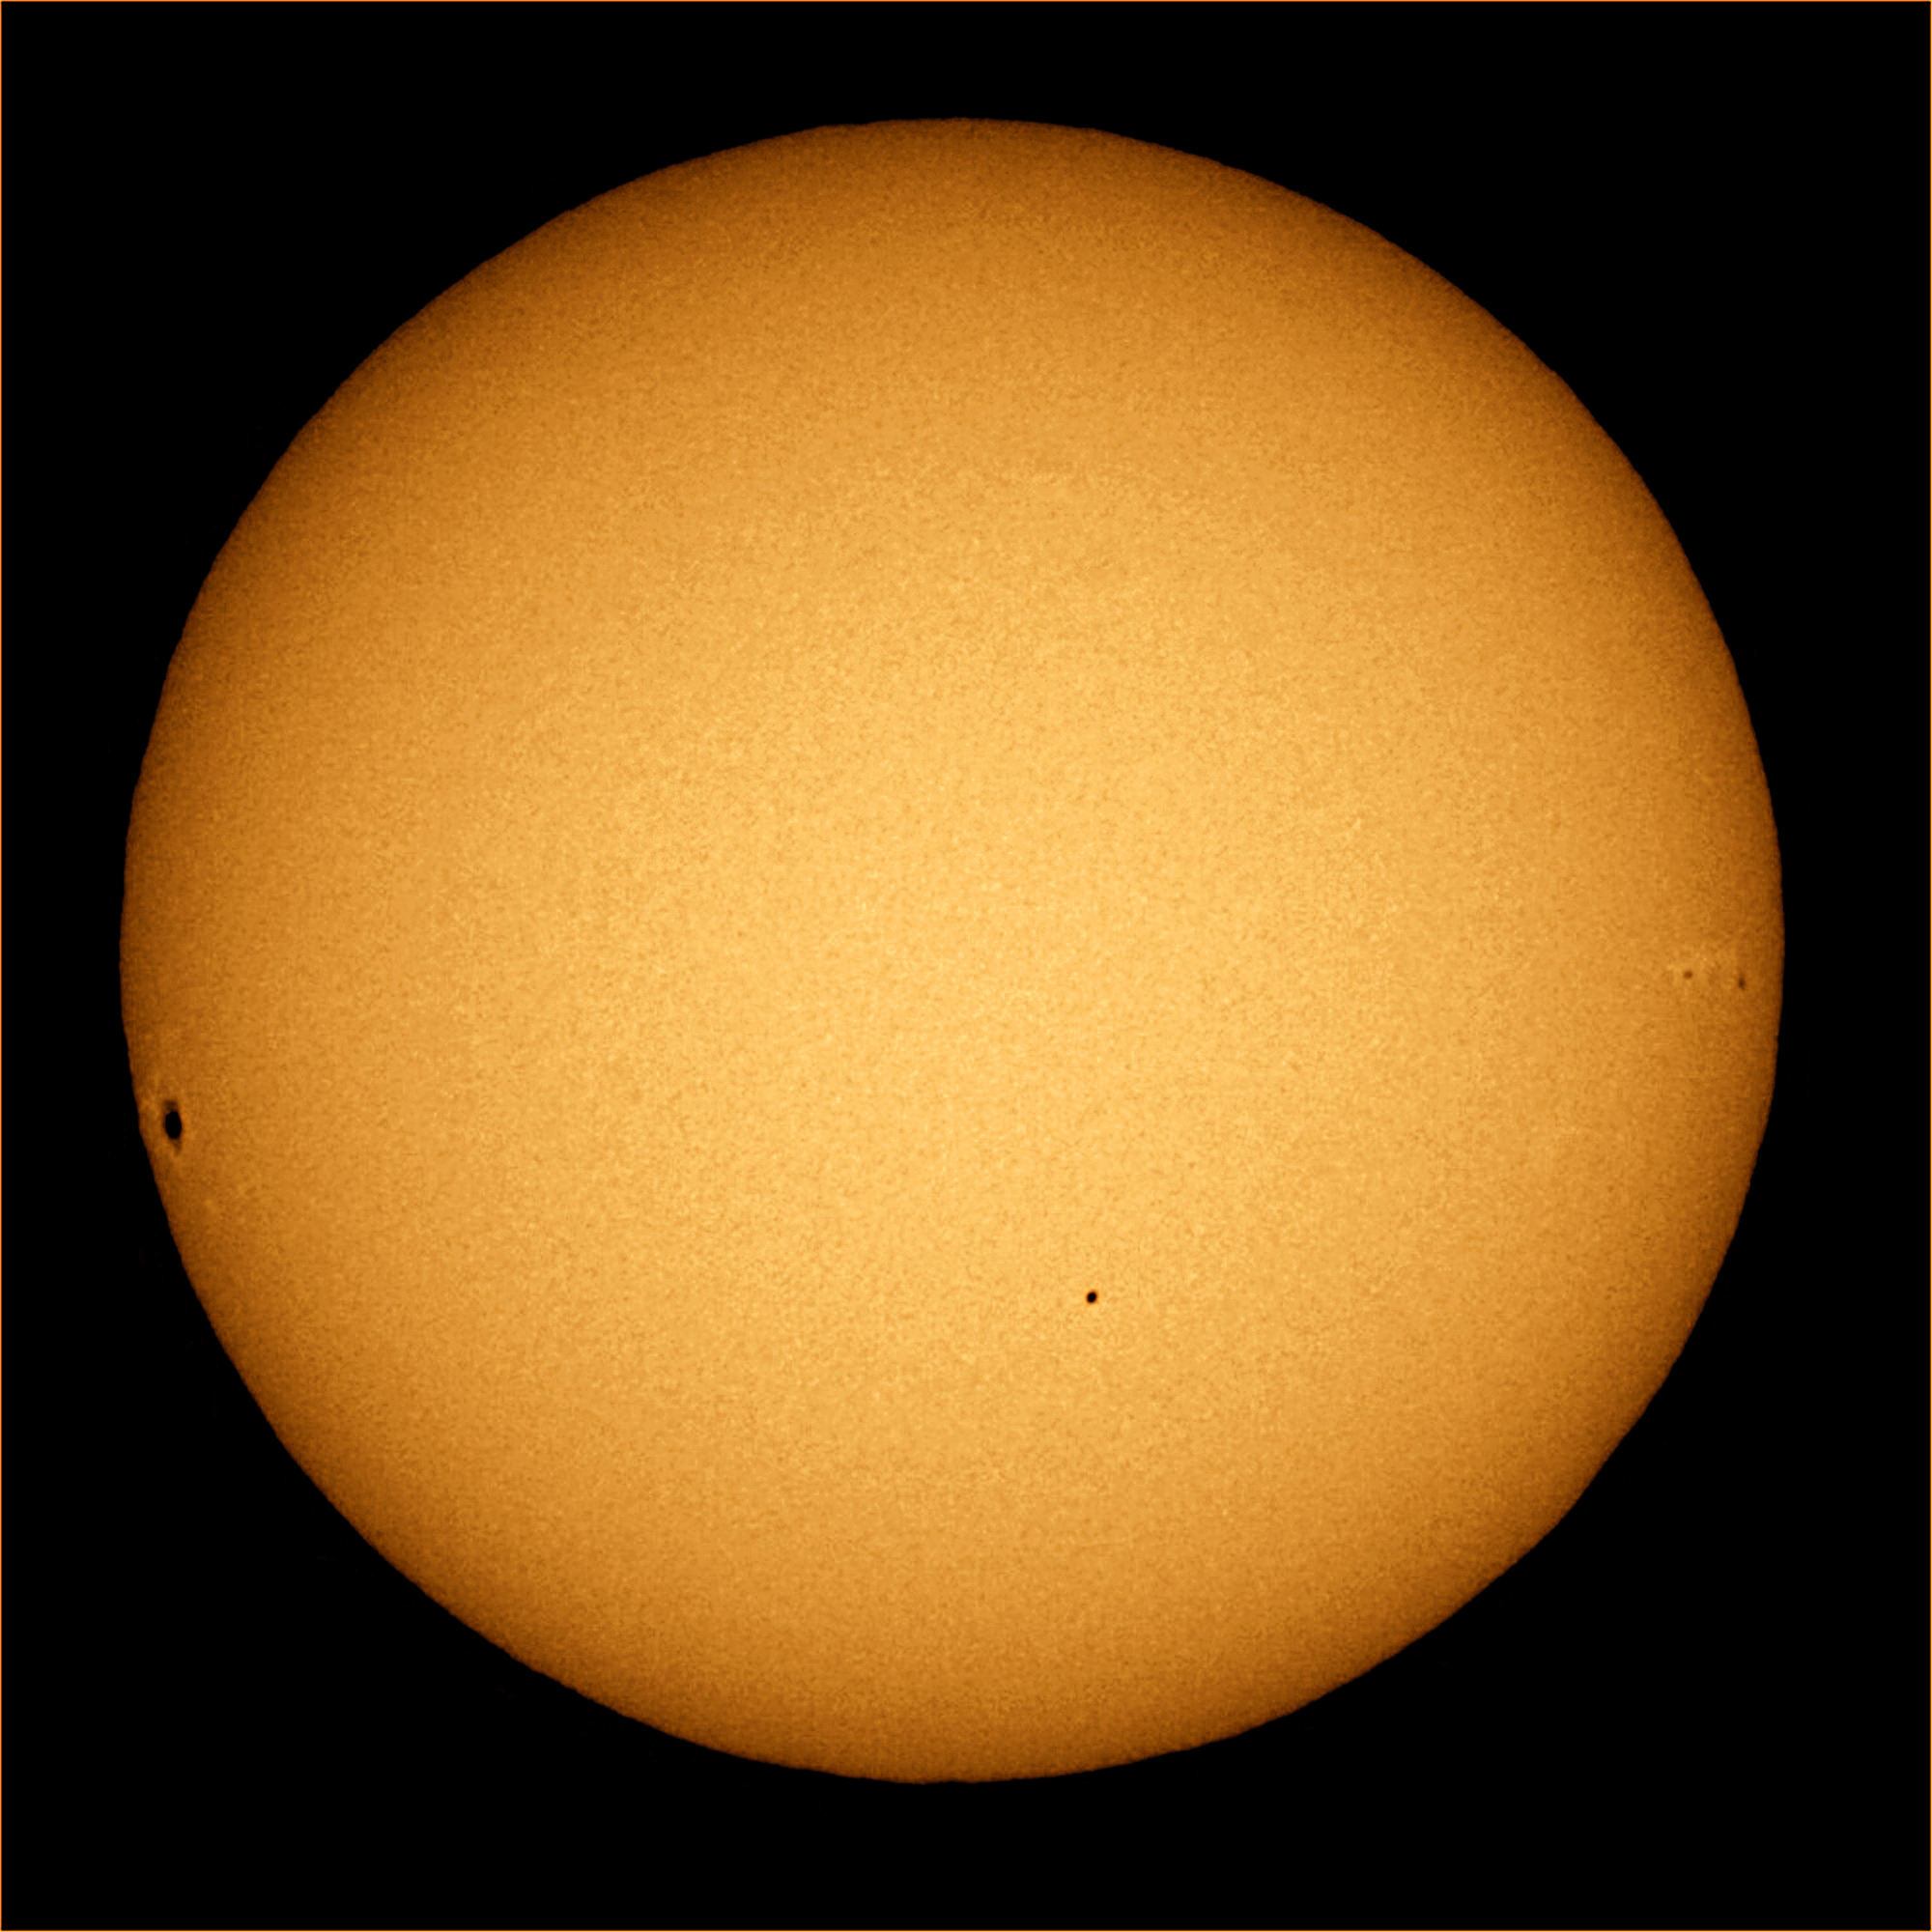 Tiny Mercury Will Be Revealed During May 9 Transit 